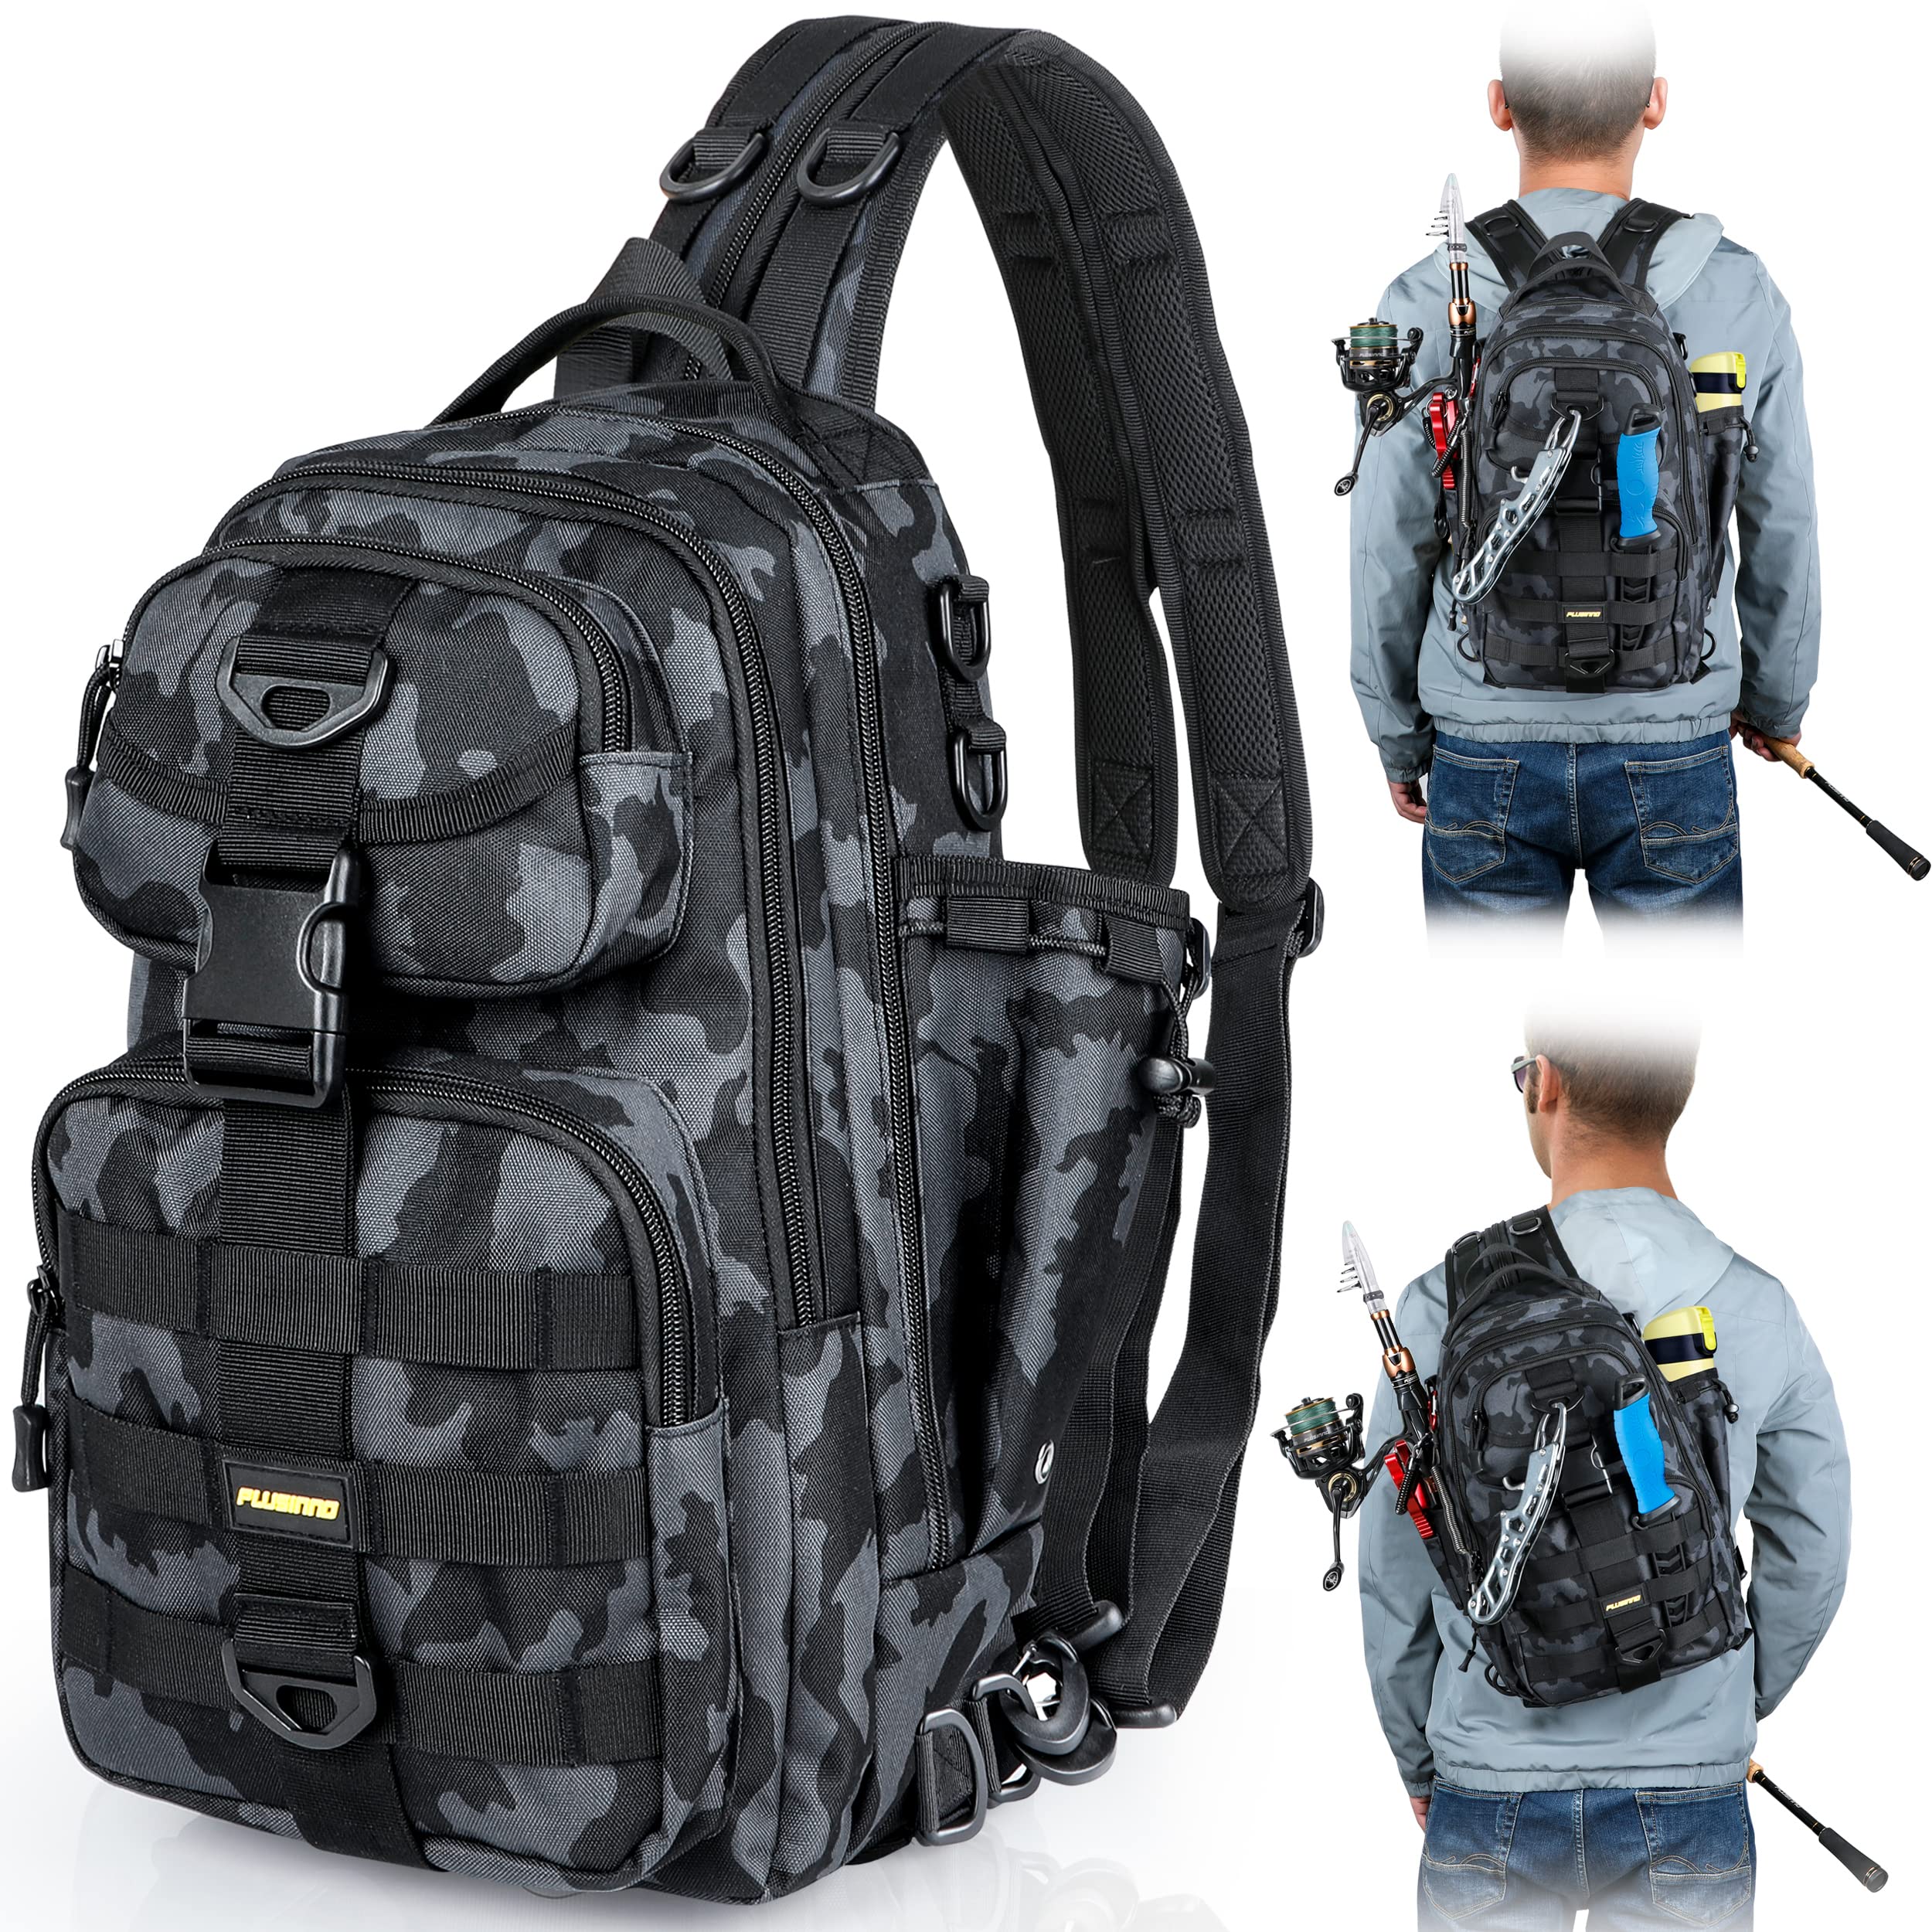 Fishing Backpack With Rod Holder Fishing Tackle Bag Fishing Gear Bag